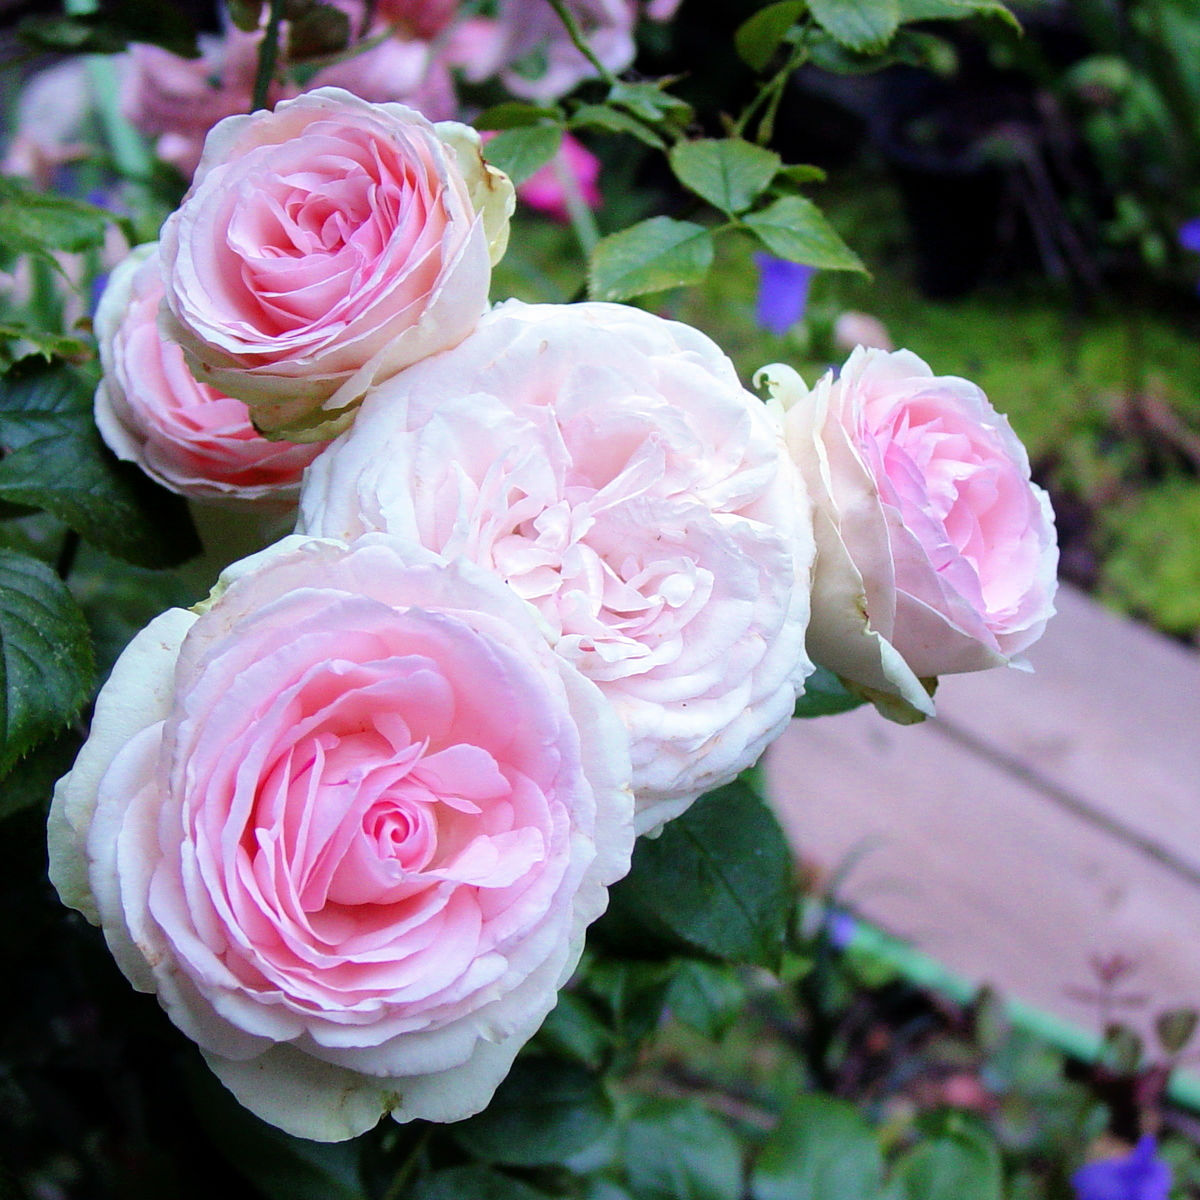 Growing Bare Root Roses: Your Easy Step-by-Step Guide